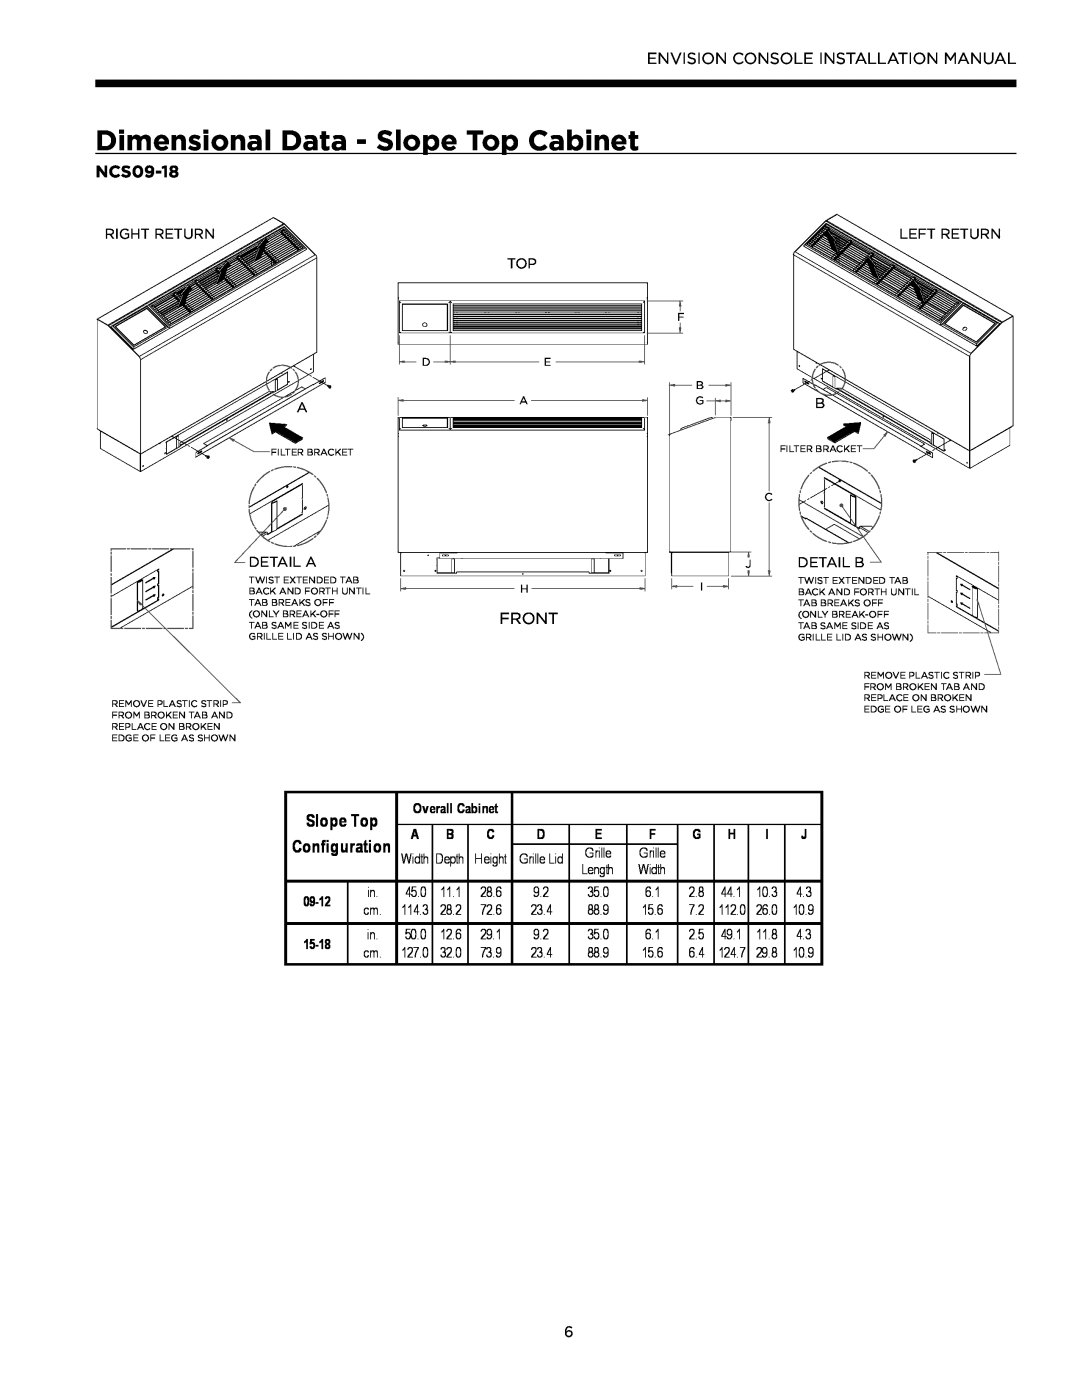 Envision Peripherals IM1609 10, IM1609 08 installation manual Dimensional Data - Slope Top Cabinet, NCS09-18, Configuration 